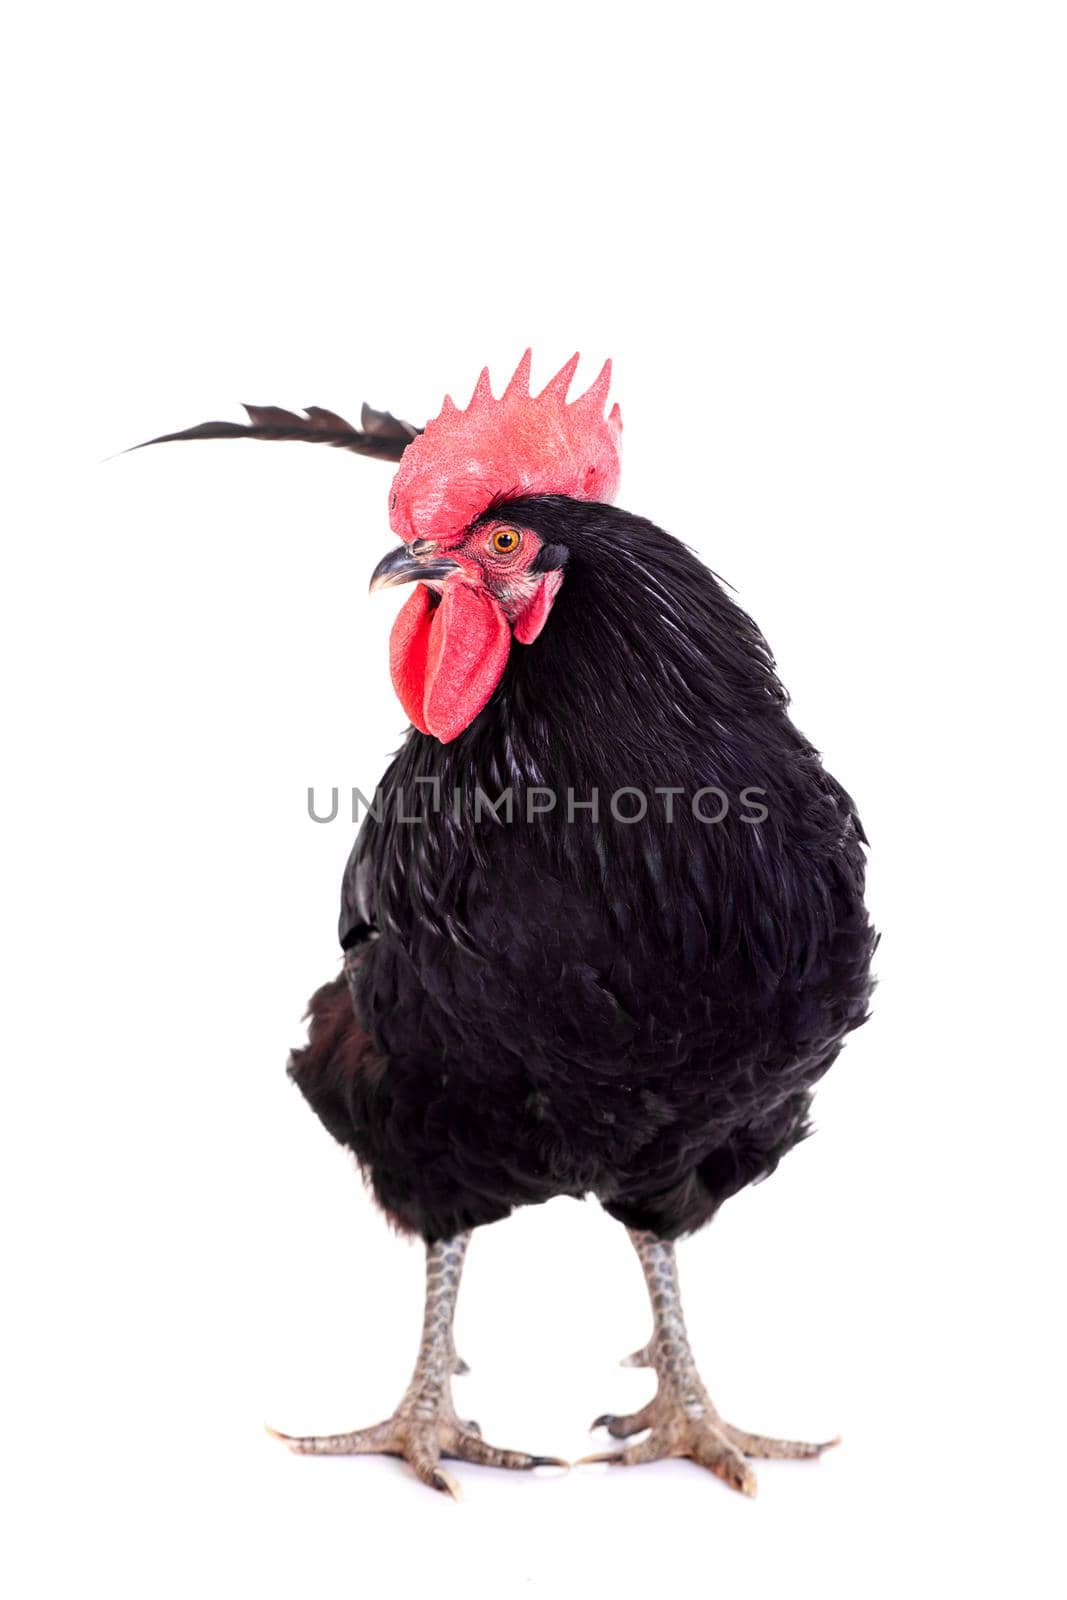 Black rooster on white by RosaJay